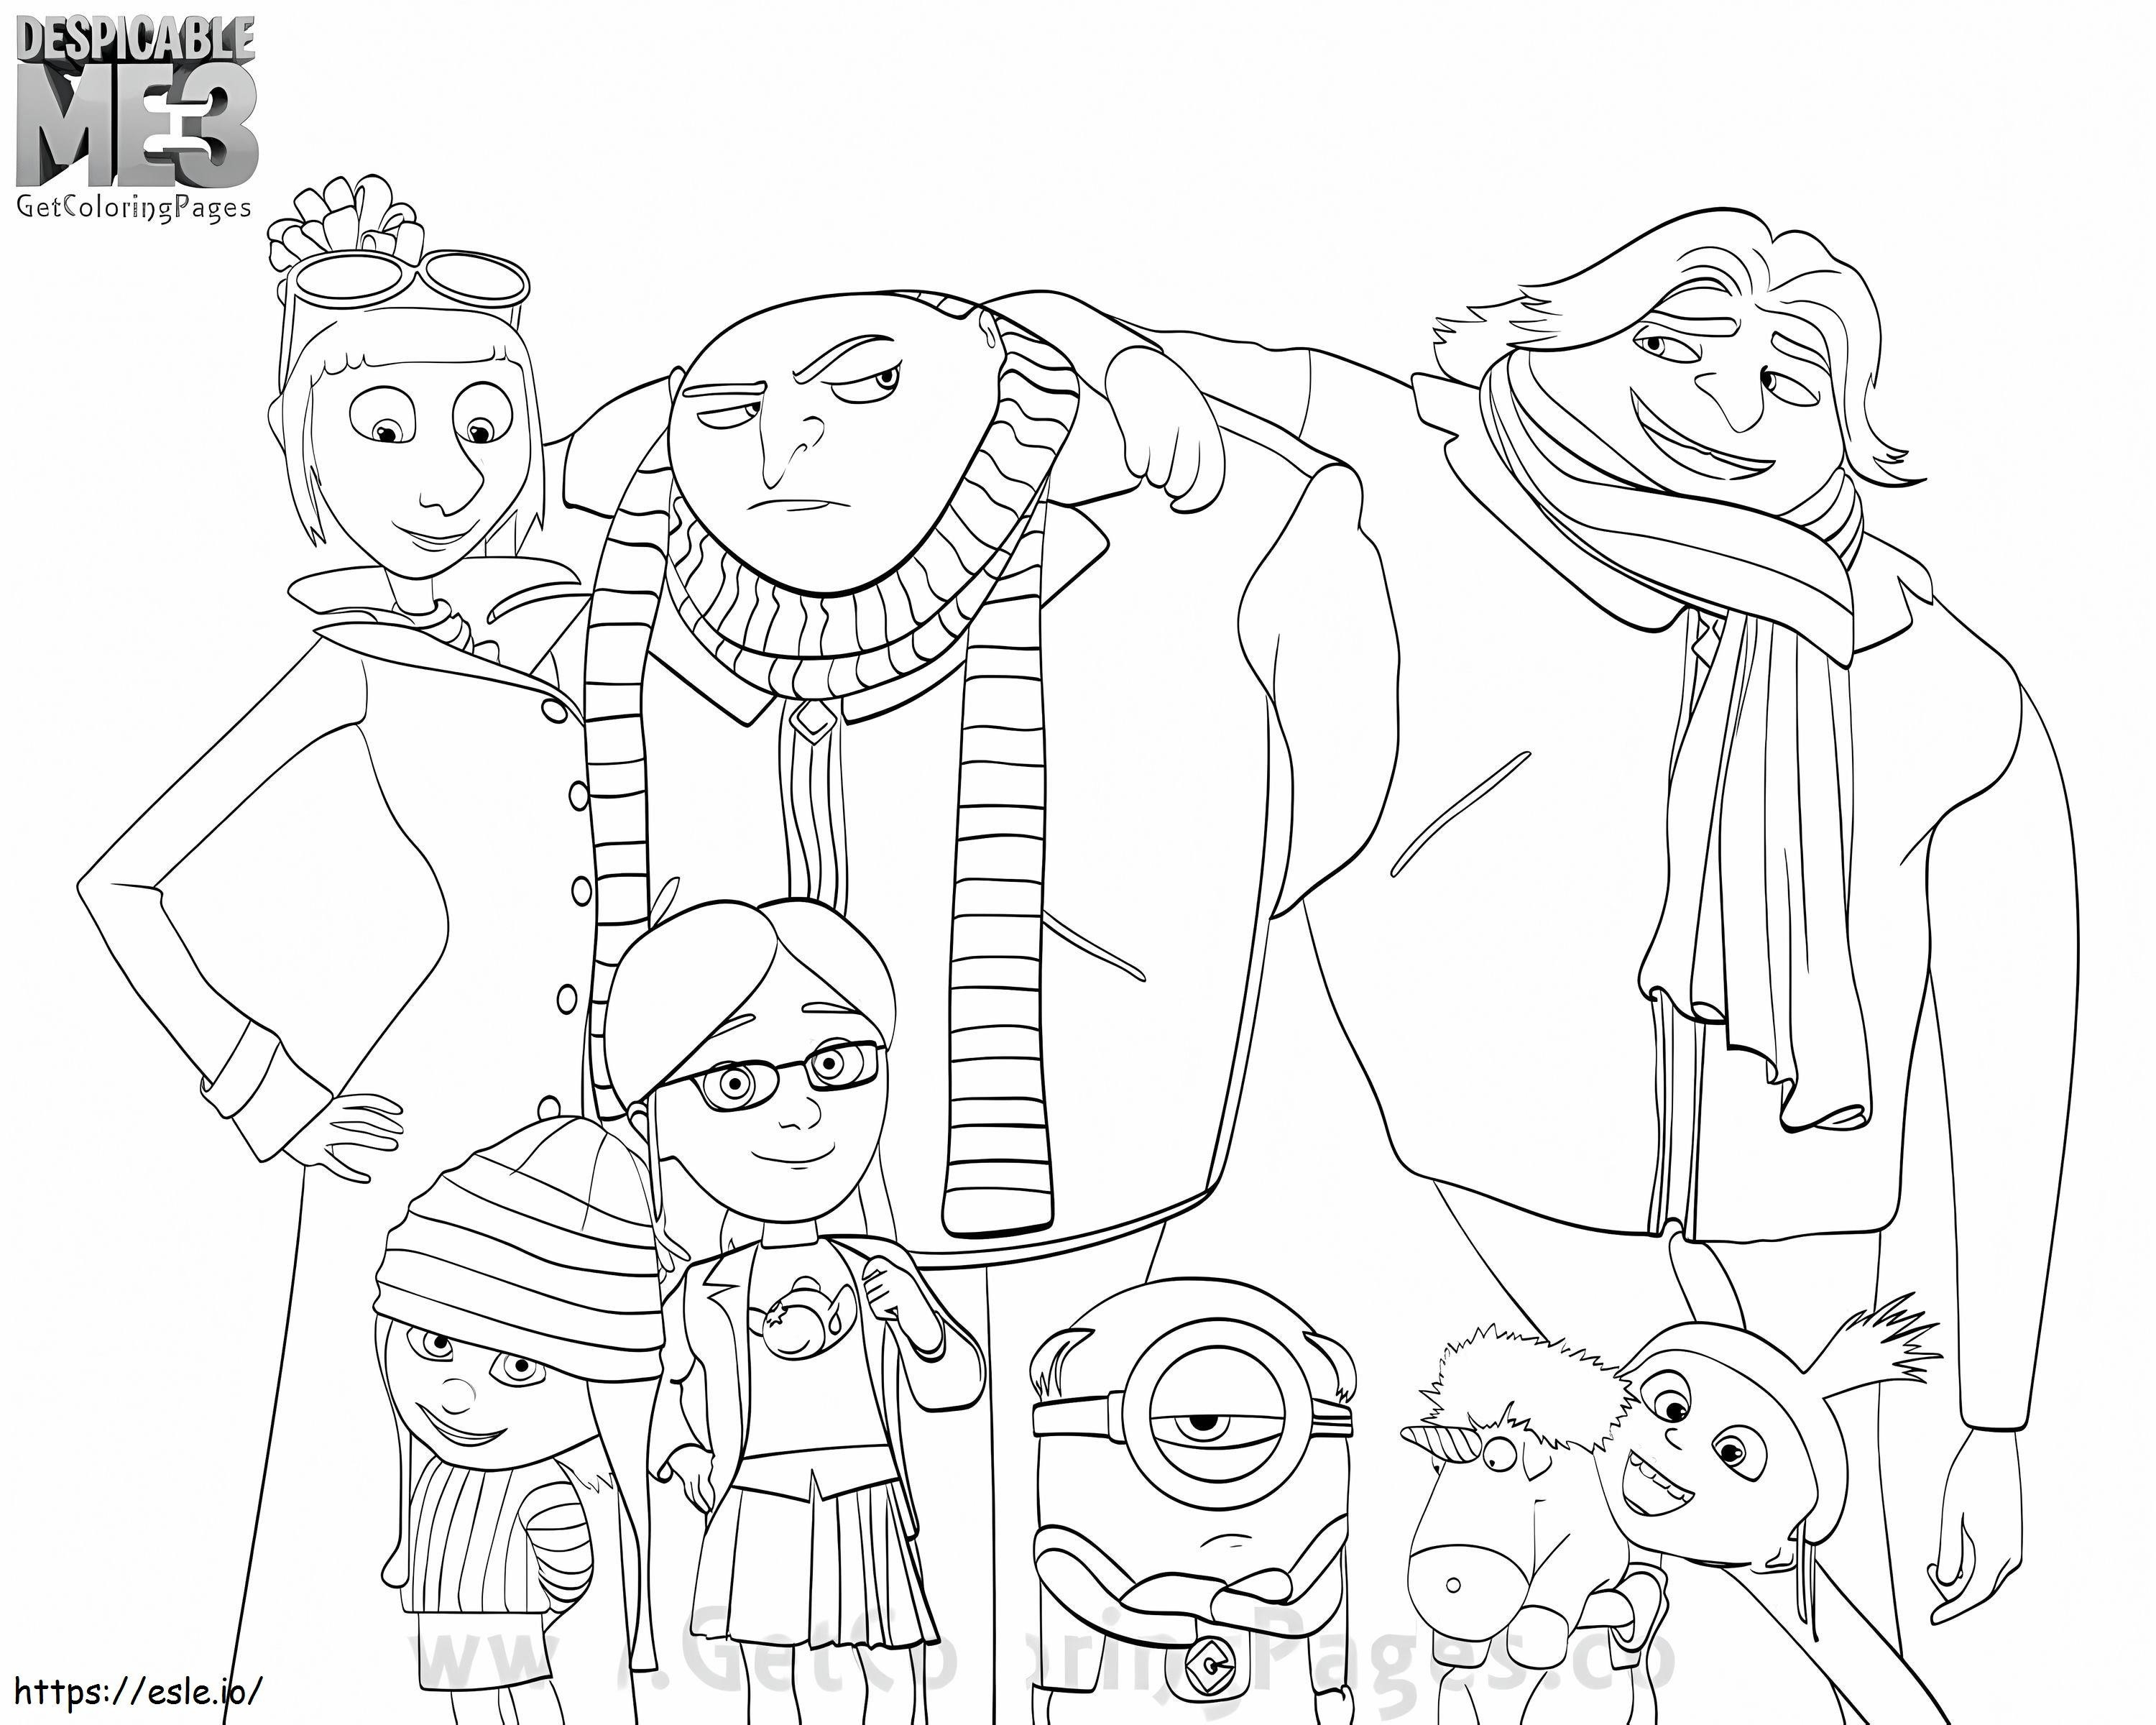 Despicable Me Characters 3 coloring page